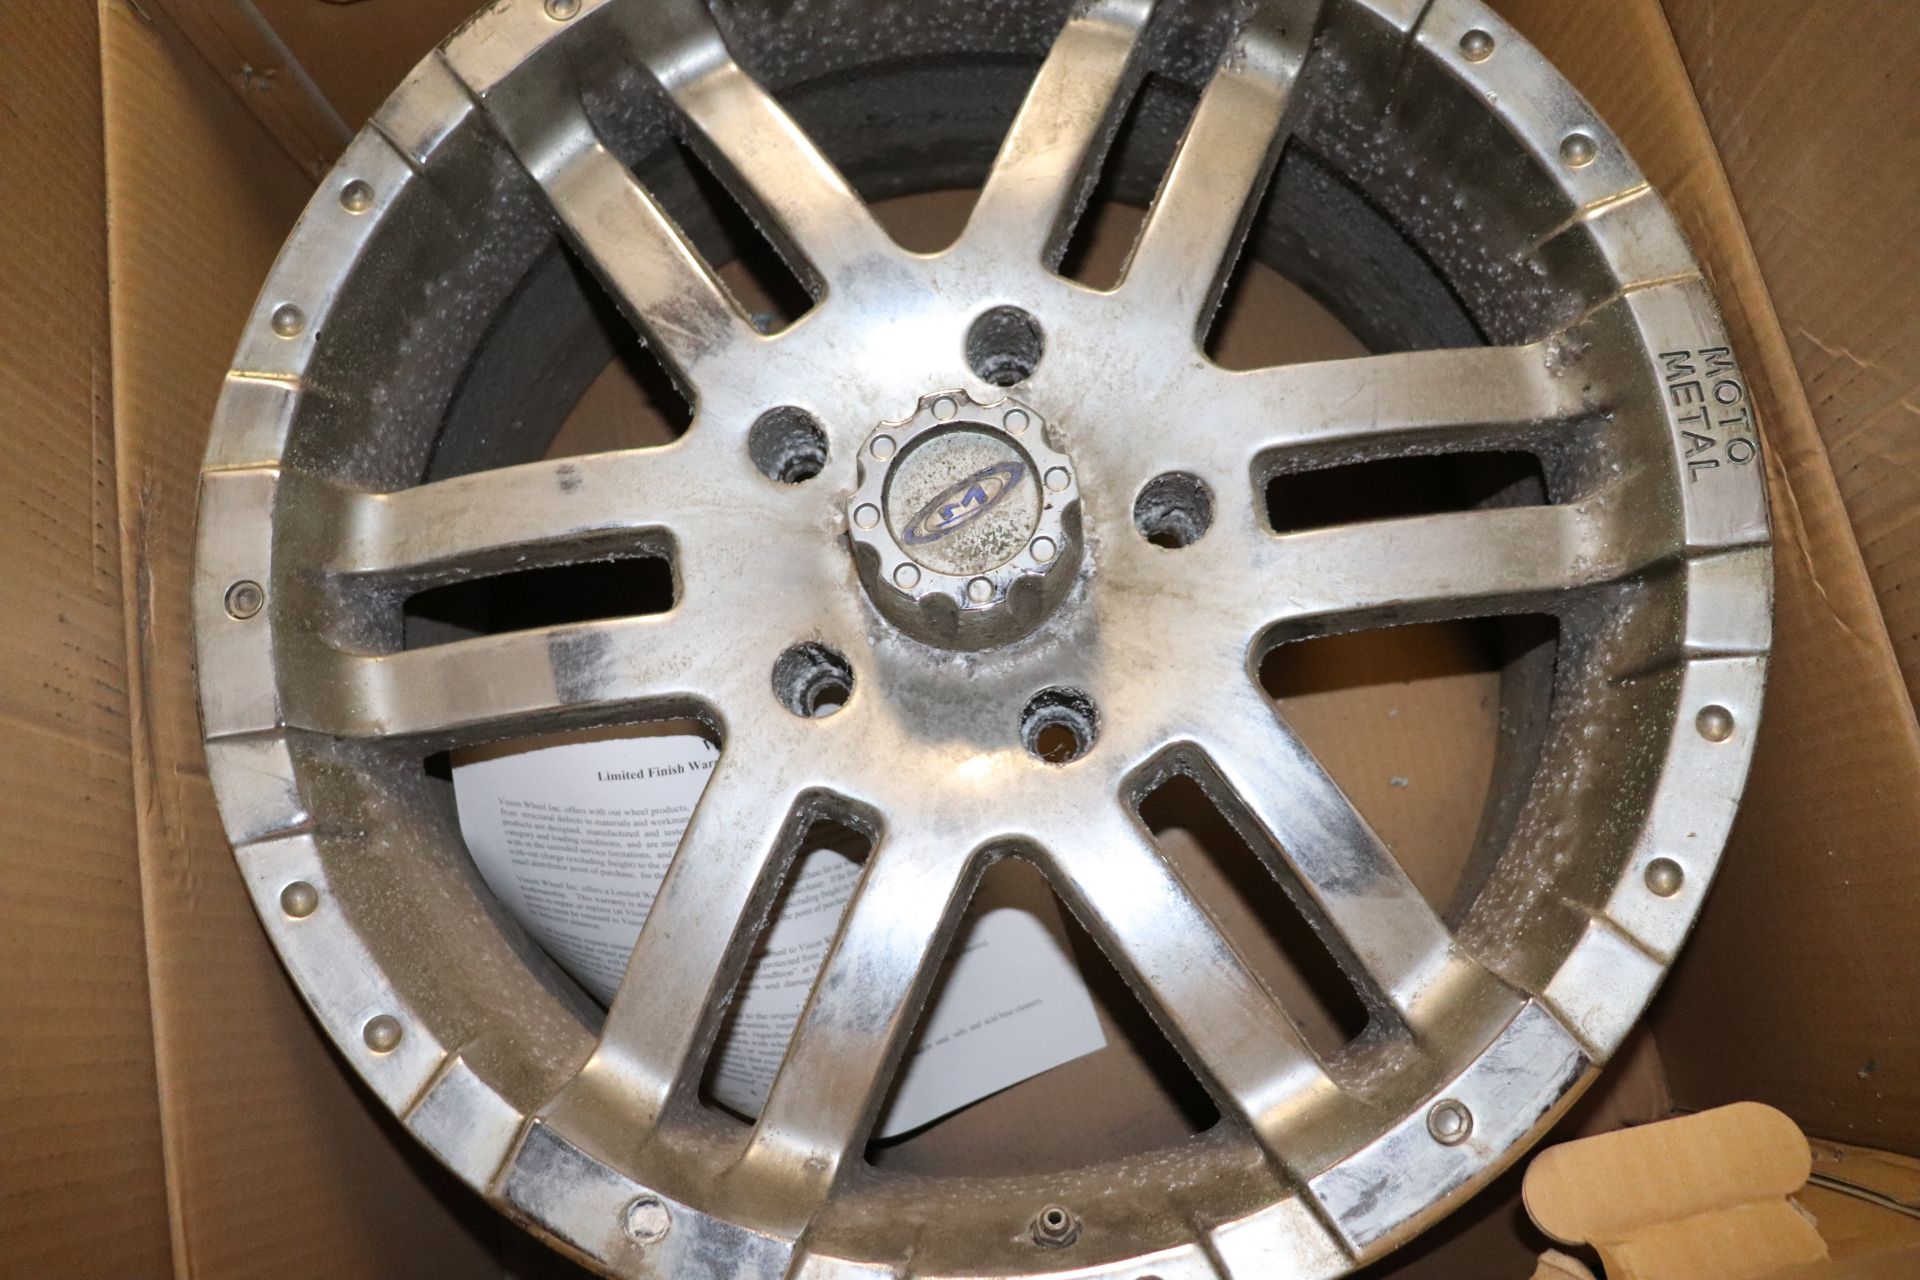 4 Moto Metal wheels, they are not what is listed on the box - Image 2 of 3